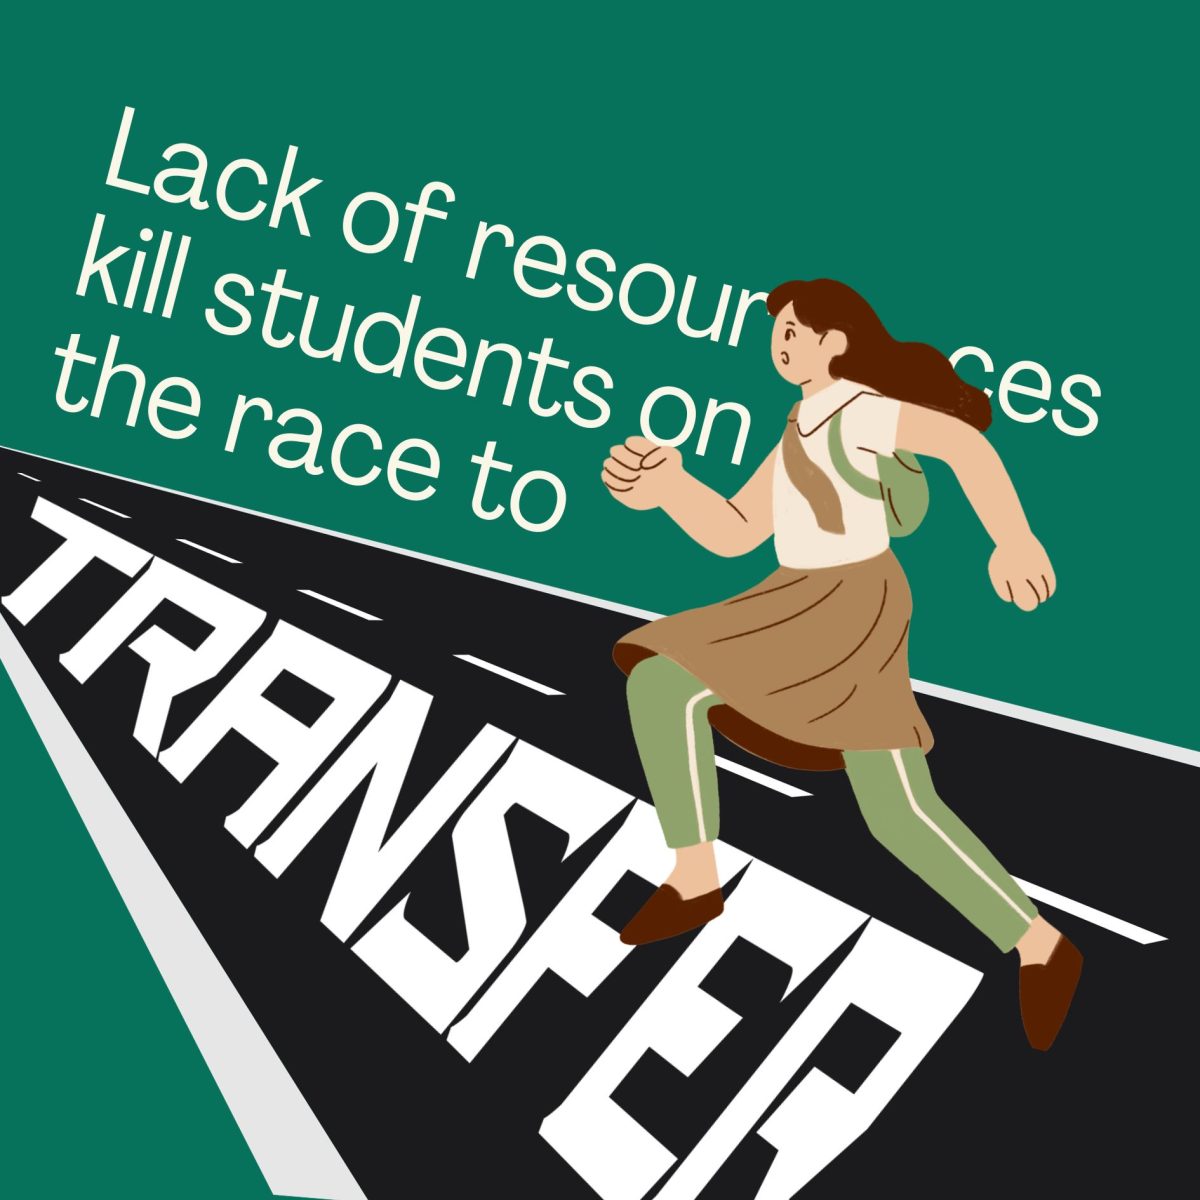 Lack of resources kills students on the race to transfer